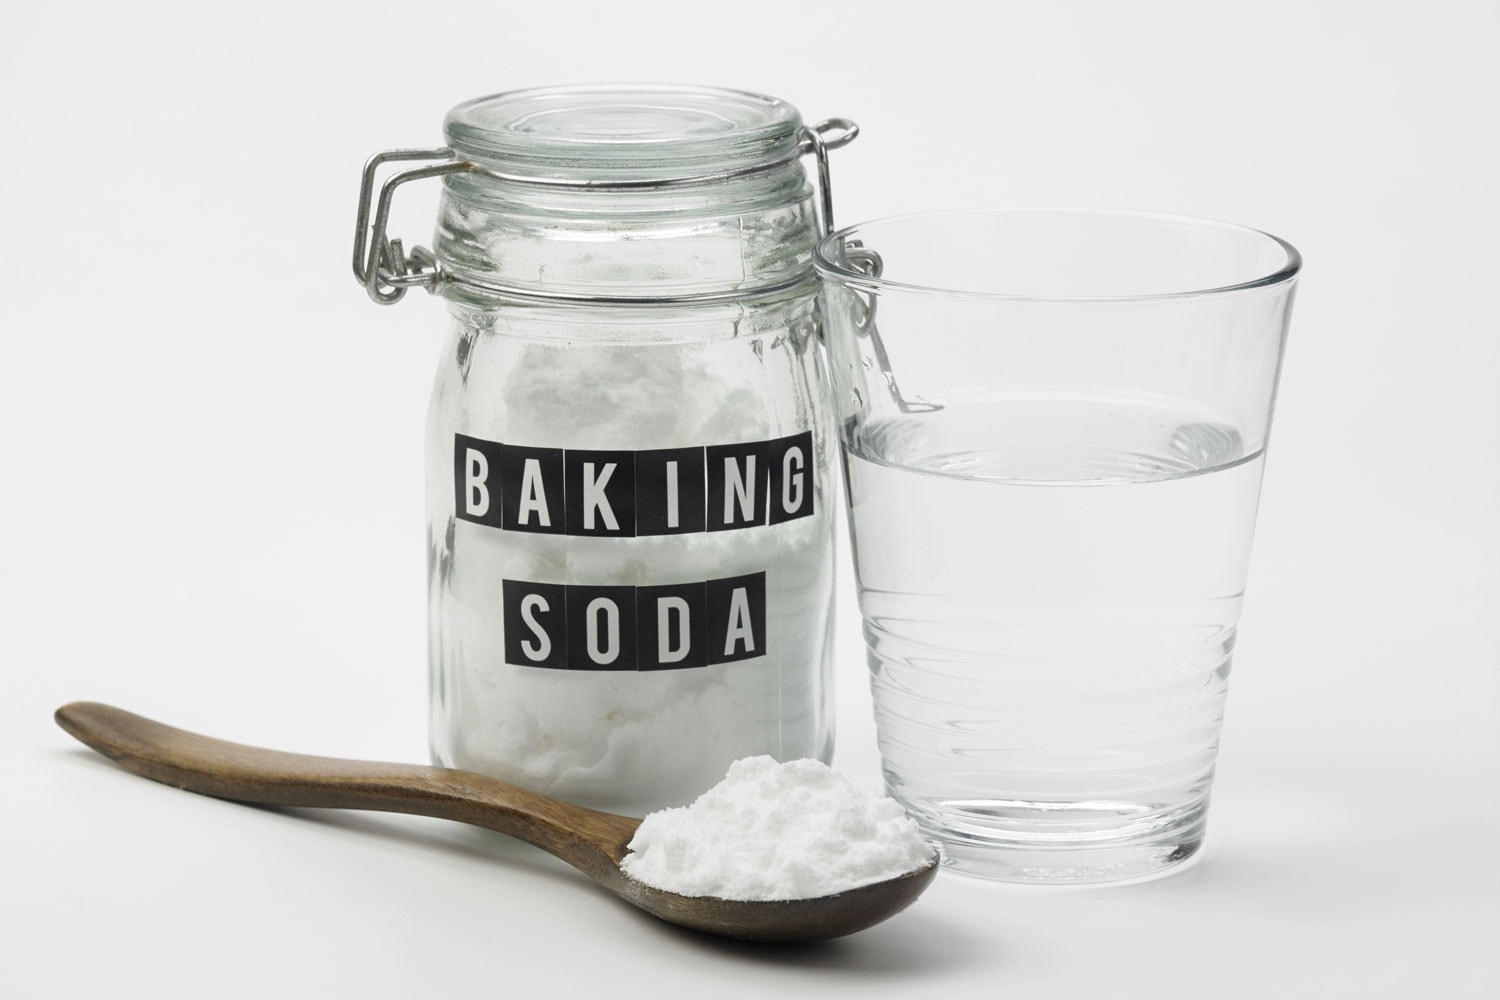 baking soda and glass of water
